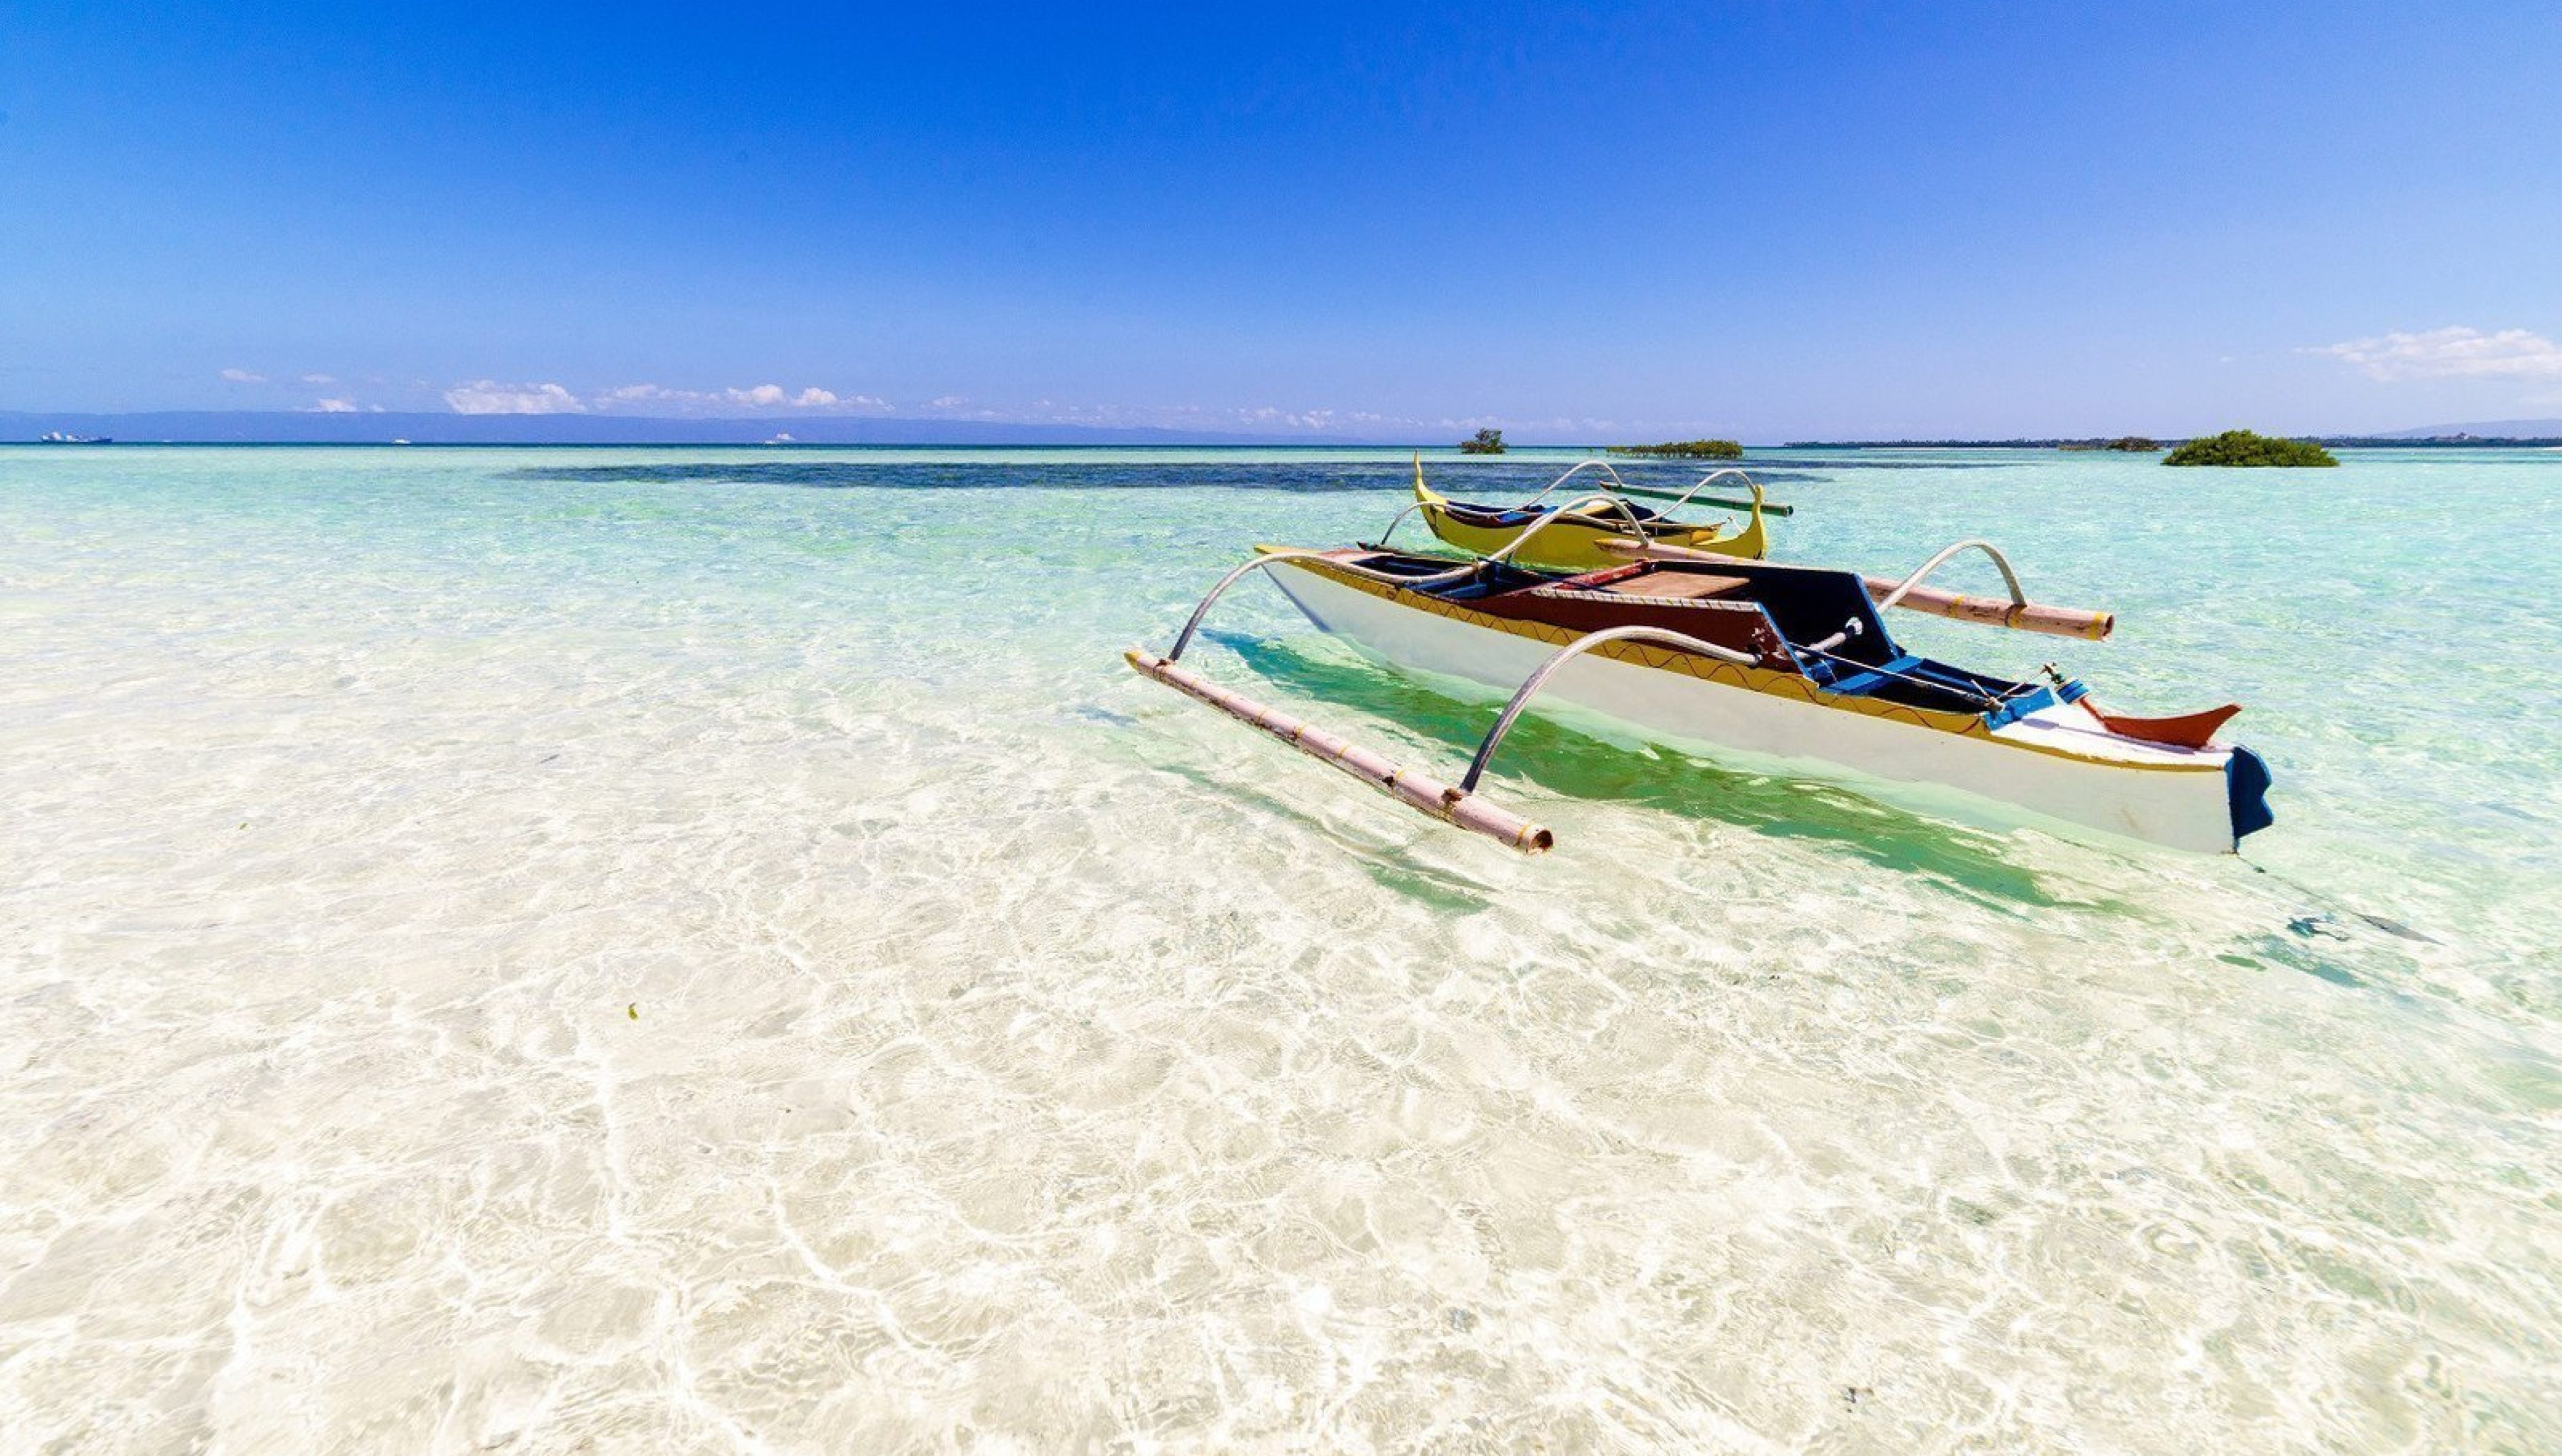 Shallow water at Virgin island - Philippines